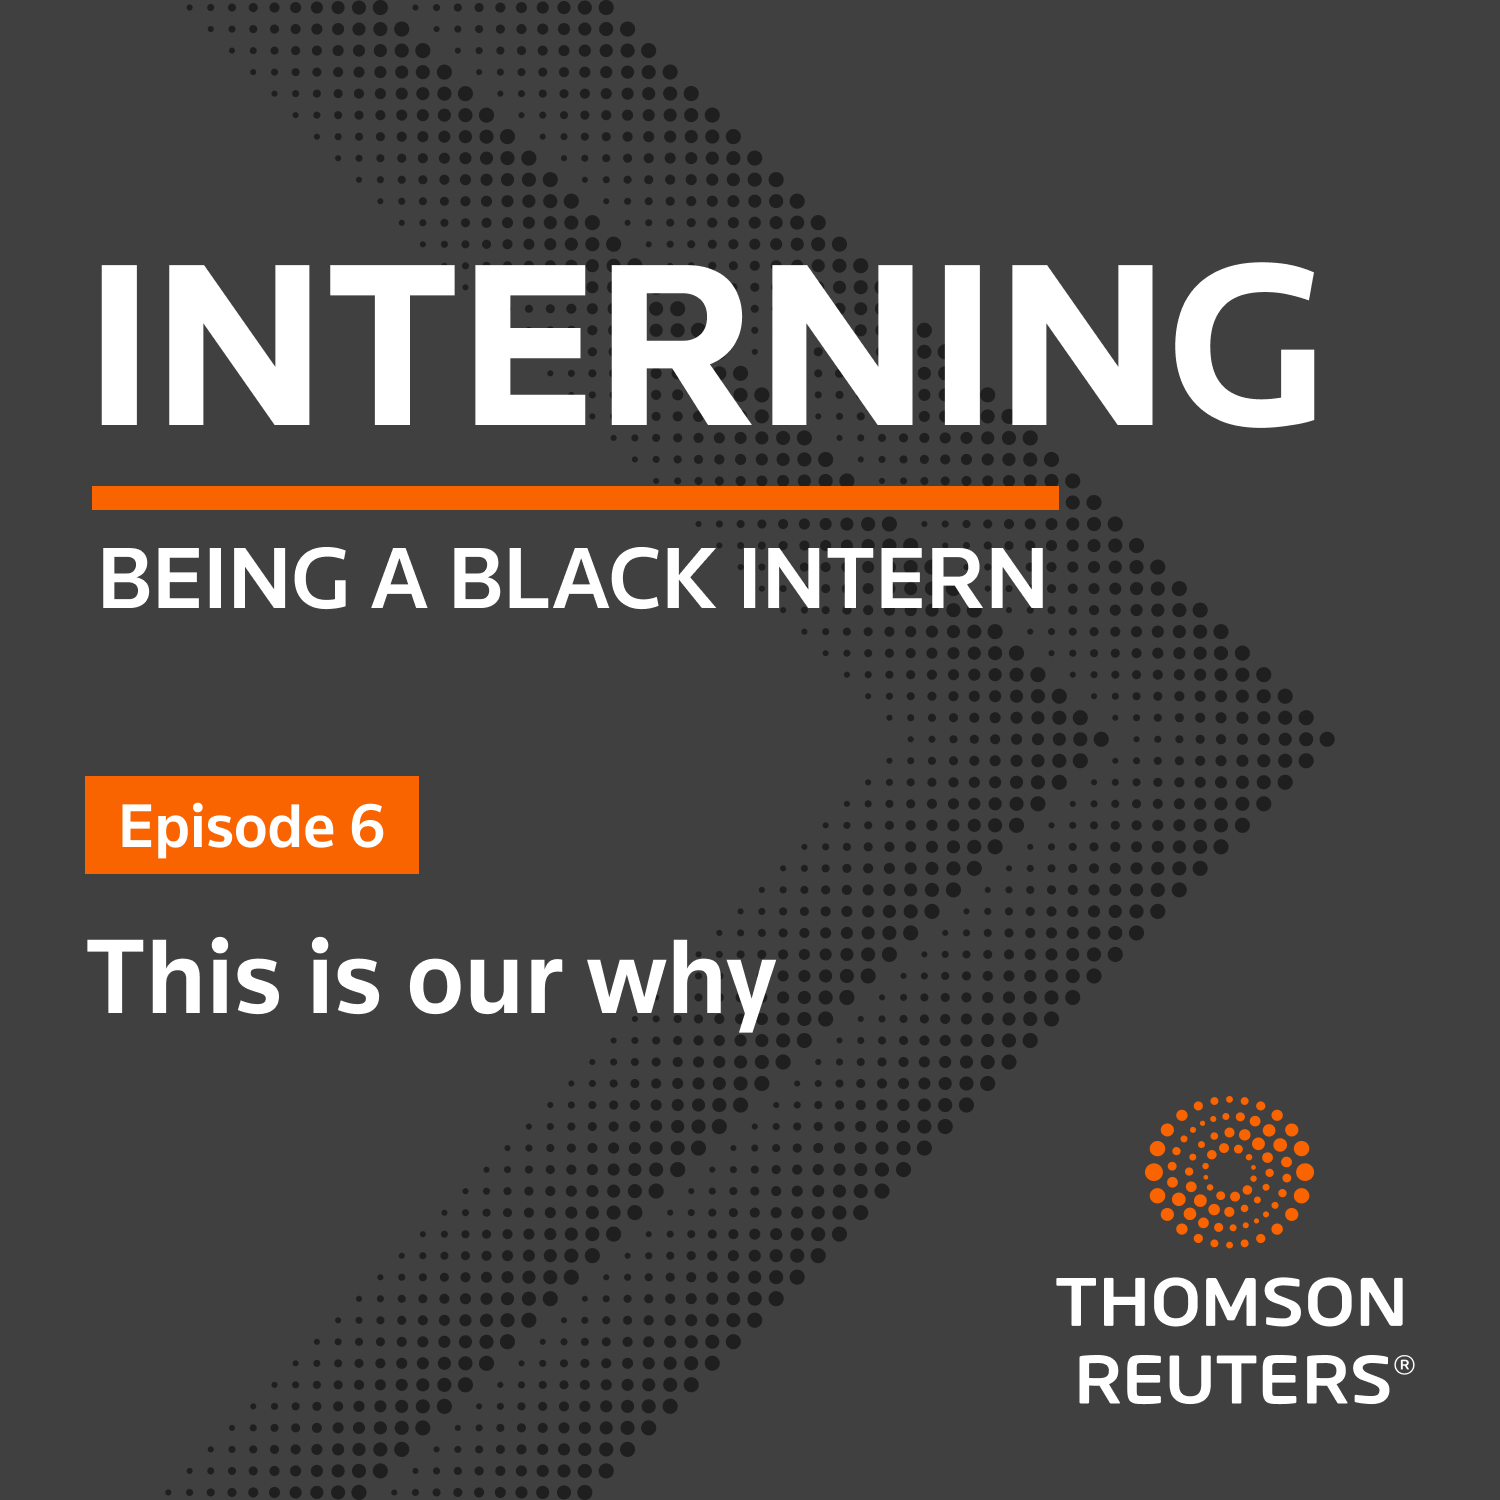 Interning episode 6: This is our why